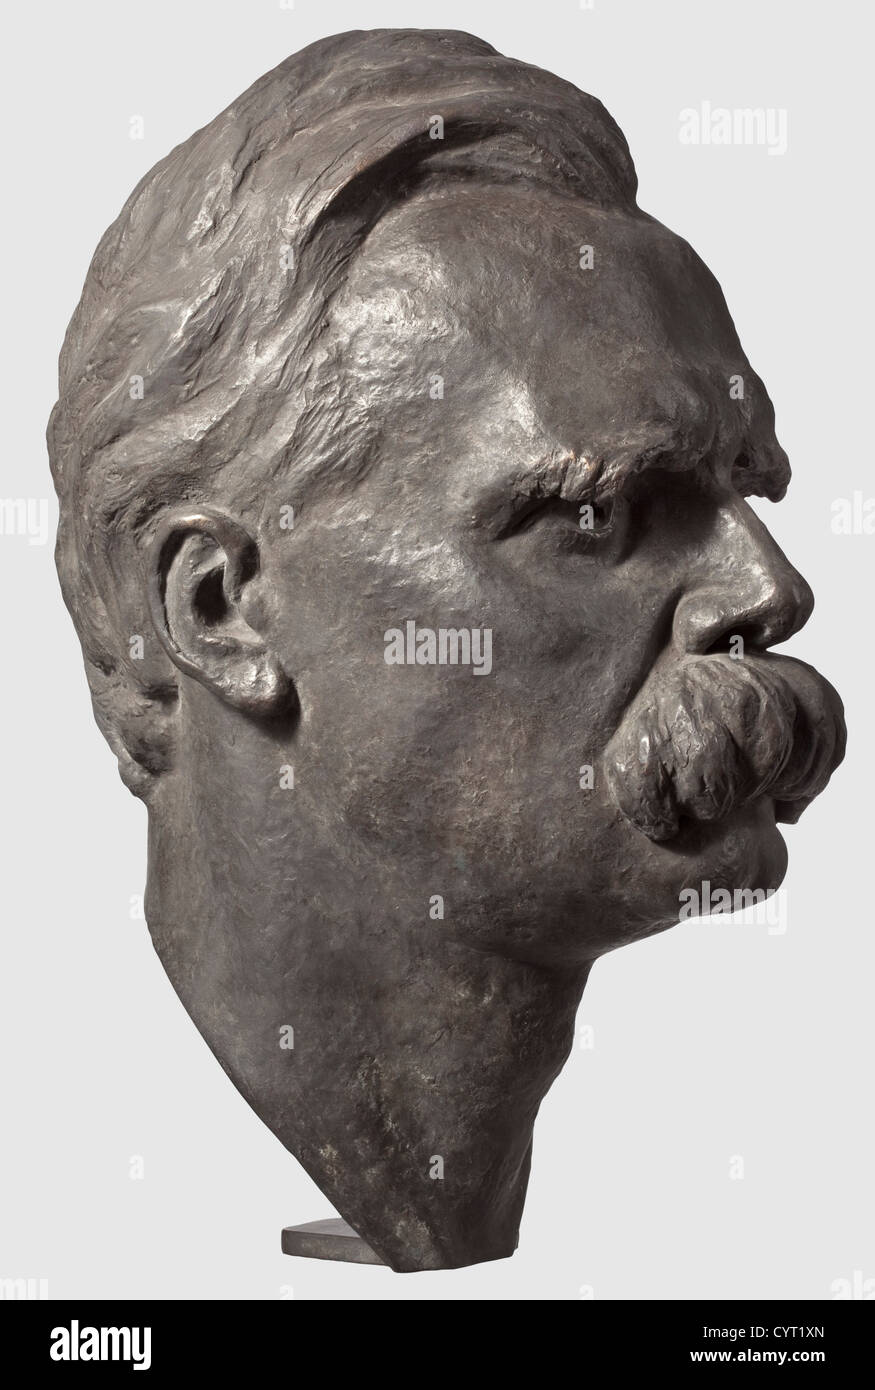 Friedrich Nietzsche (1844 - 1900), a portrait bust by Friedrich Rogge 1943 Bronze with dark patina, the larger-than-life portrayal signed at the nape 'J.F. Rogge', the plinth with foundry stamp 'Lenz'. Height ca. 53 cm. This bust and the following death mask were made for the Nietzsche memorial, which was planned in Weimar and was to house the Nietzsche archive. Dr. Johannes Friedrich Rogge (1898 - 1983) first studied sciences before dedicating himself to the fine arts from 1922 onwards. In spite of the critical acclaim he gained at the Berlin art exhibition he, Stock Photo